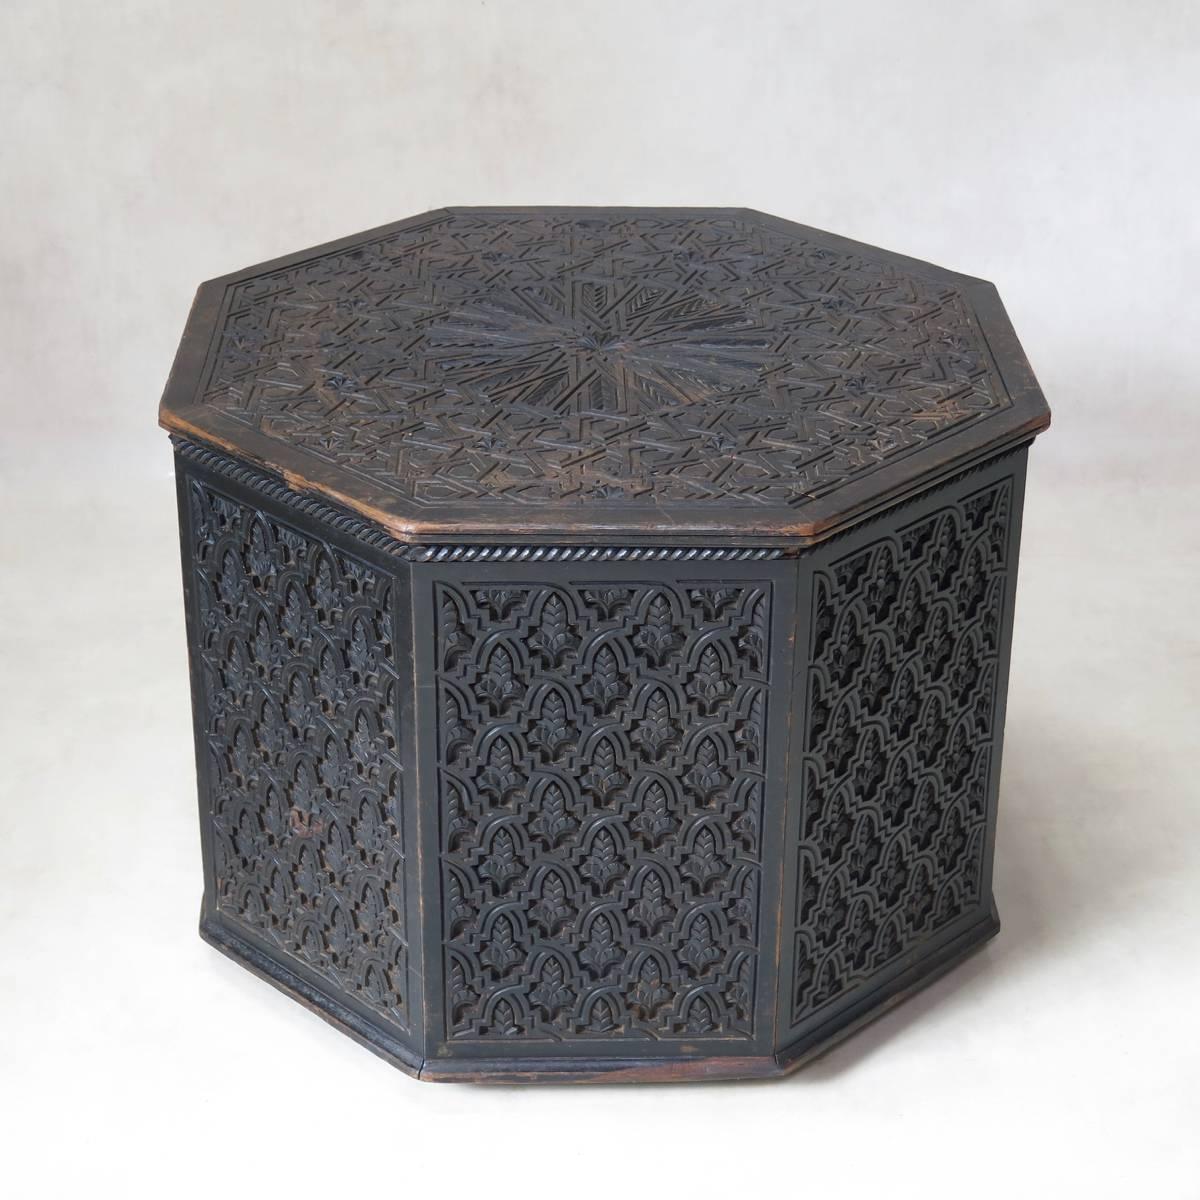 Rare and beautiful octagonal, ebonized wood coffee table with an intricately carved pattern on the sides and top. Mounted on casters.